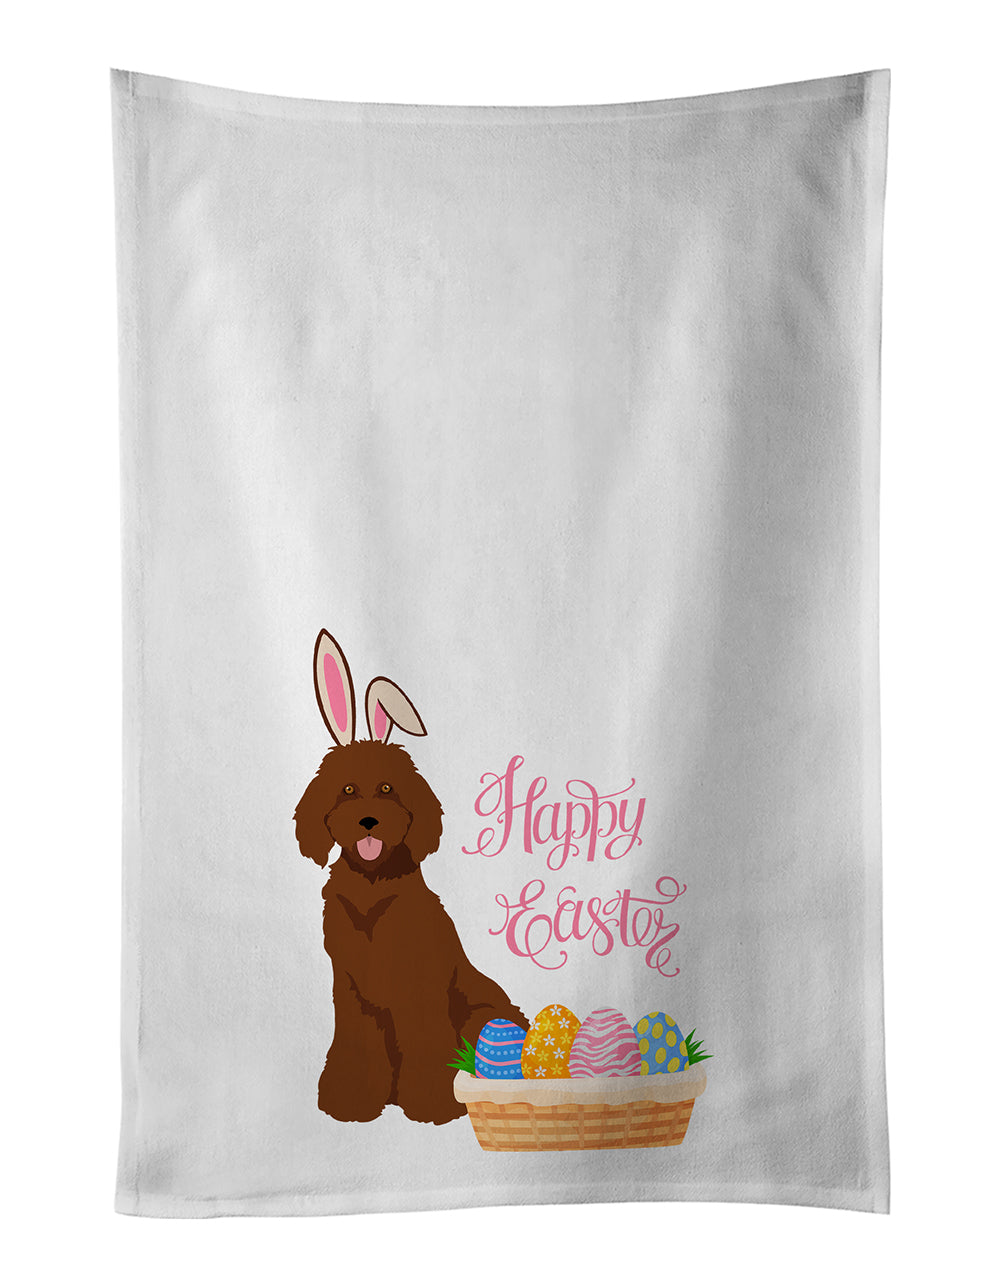 Buy this Standard Red Poodle Easter White Kitchen Towel Set of 2 Dish Towels